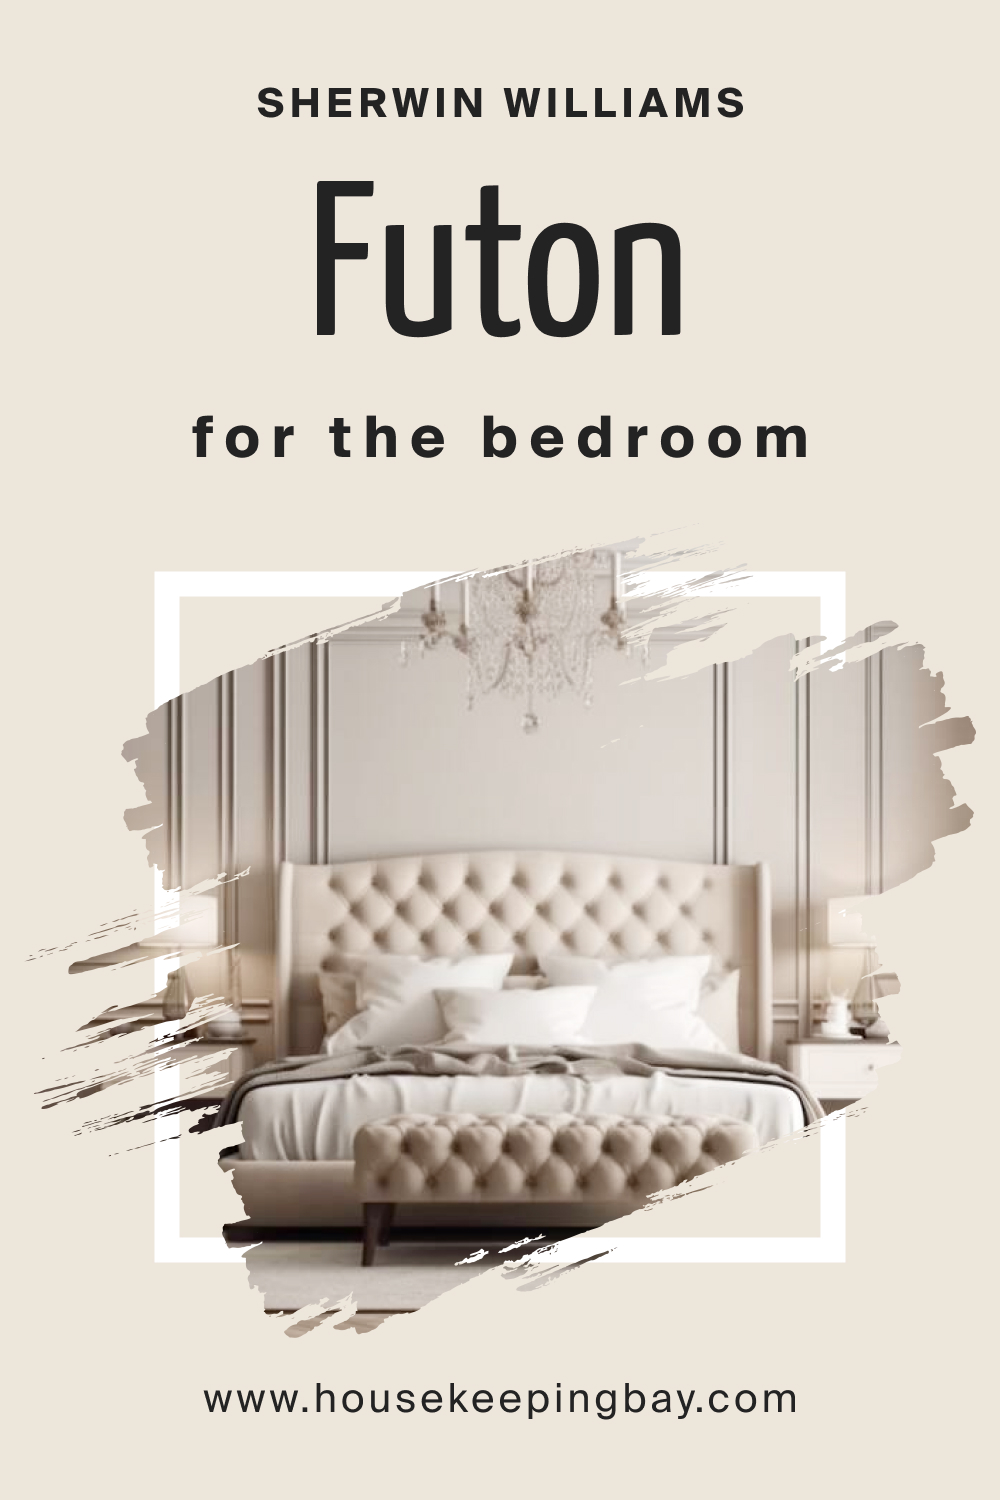 Sherwin Williams. SW 7101 Futon For the bedroom